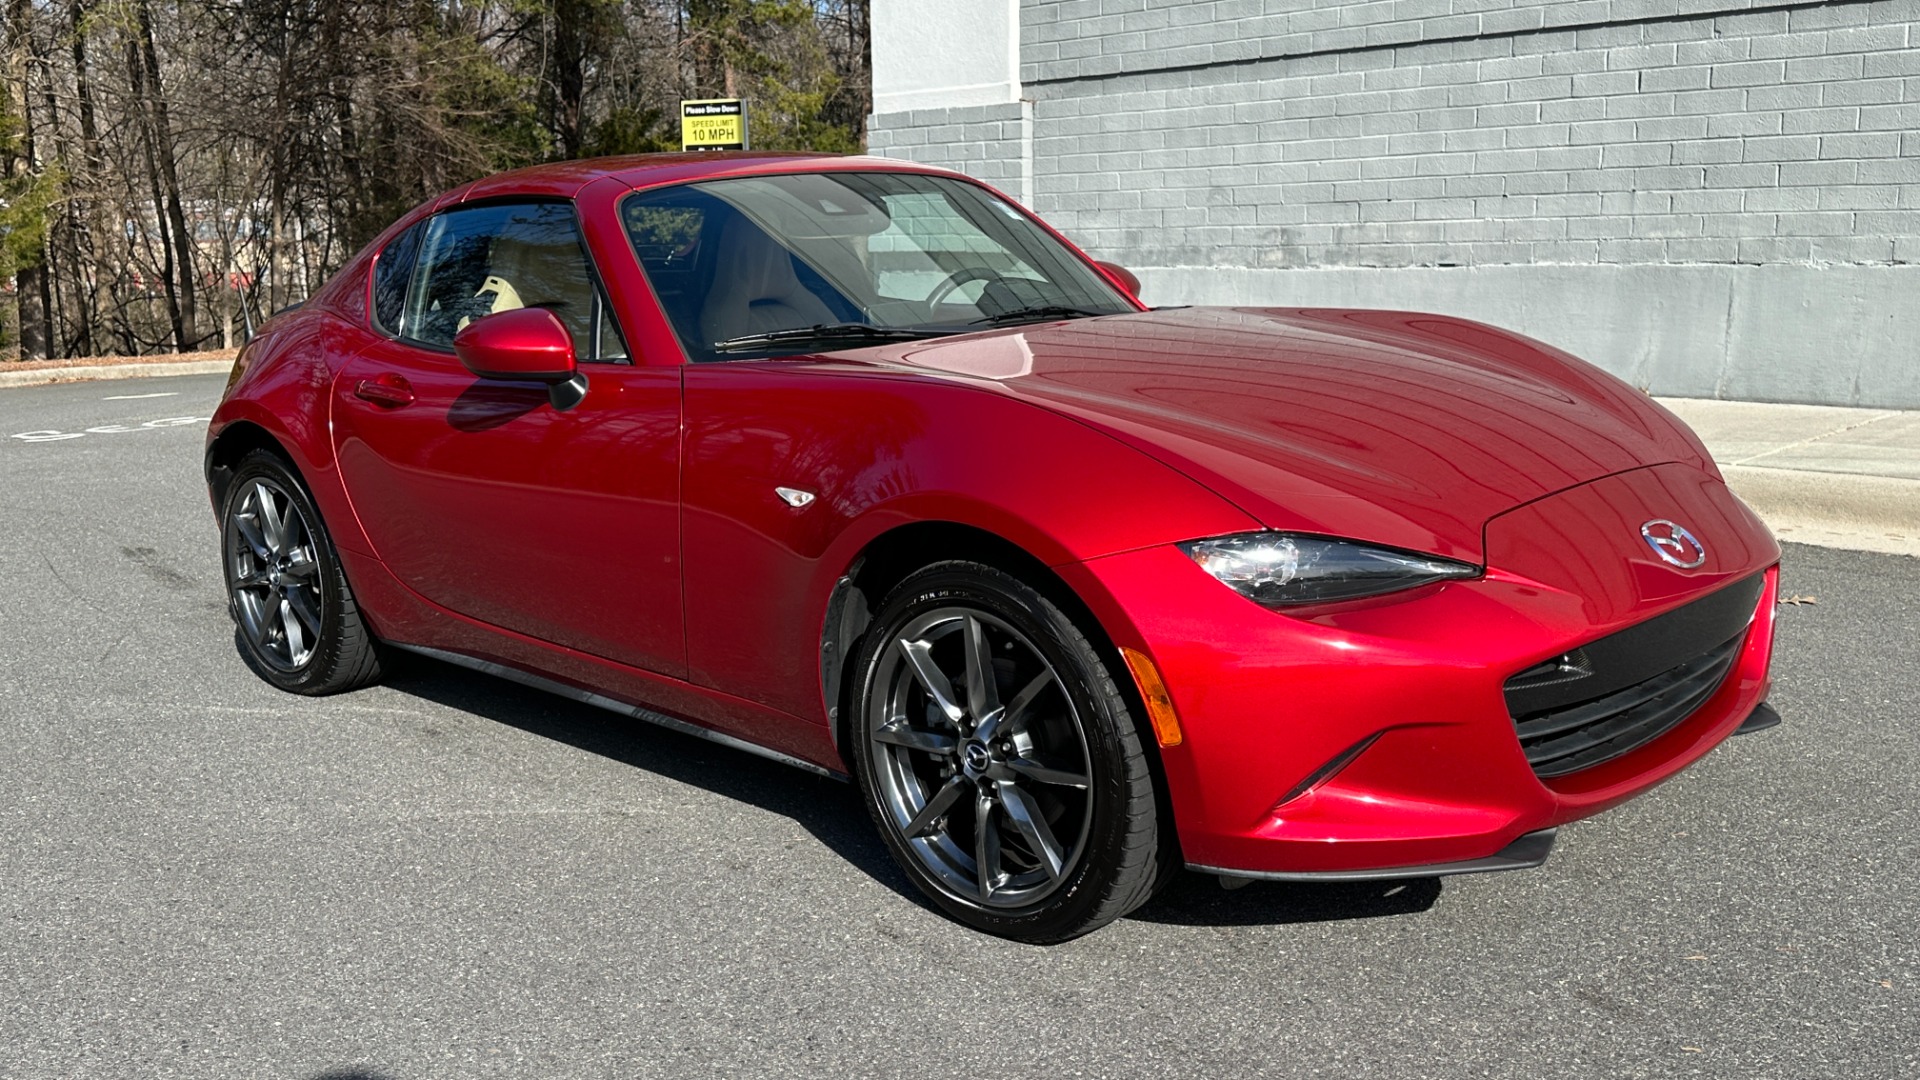 Used 2017 Mazda MX-5 Miata RF GRAND TOURING / POWER HARD TOP CONVERTIBLE / AUTOMATIC for sale $22,995 at Formula Imports in Charlotte NC 28227 2